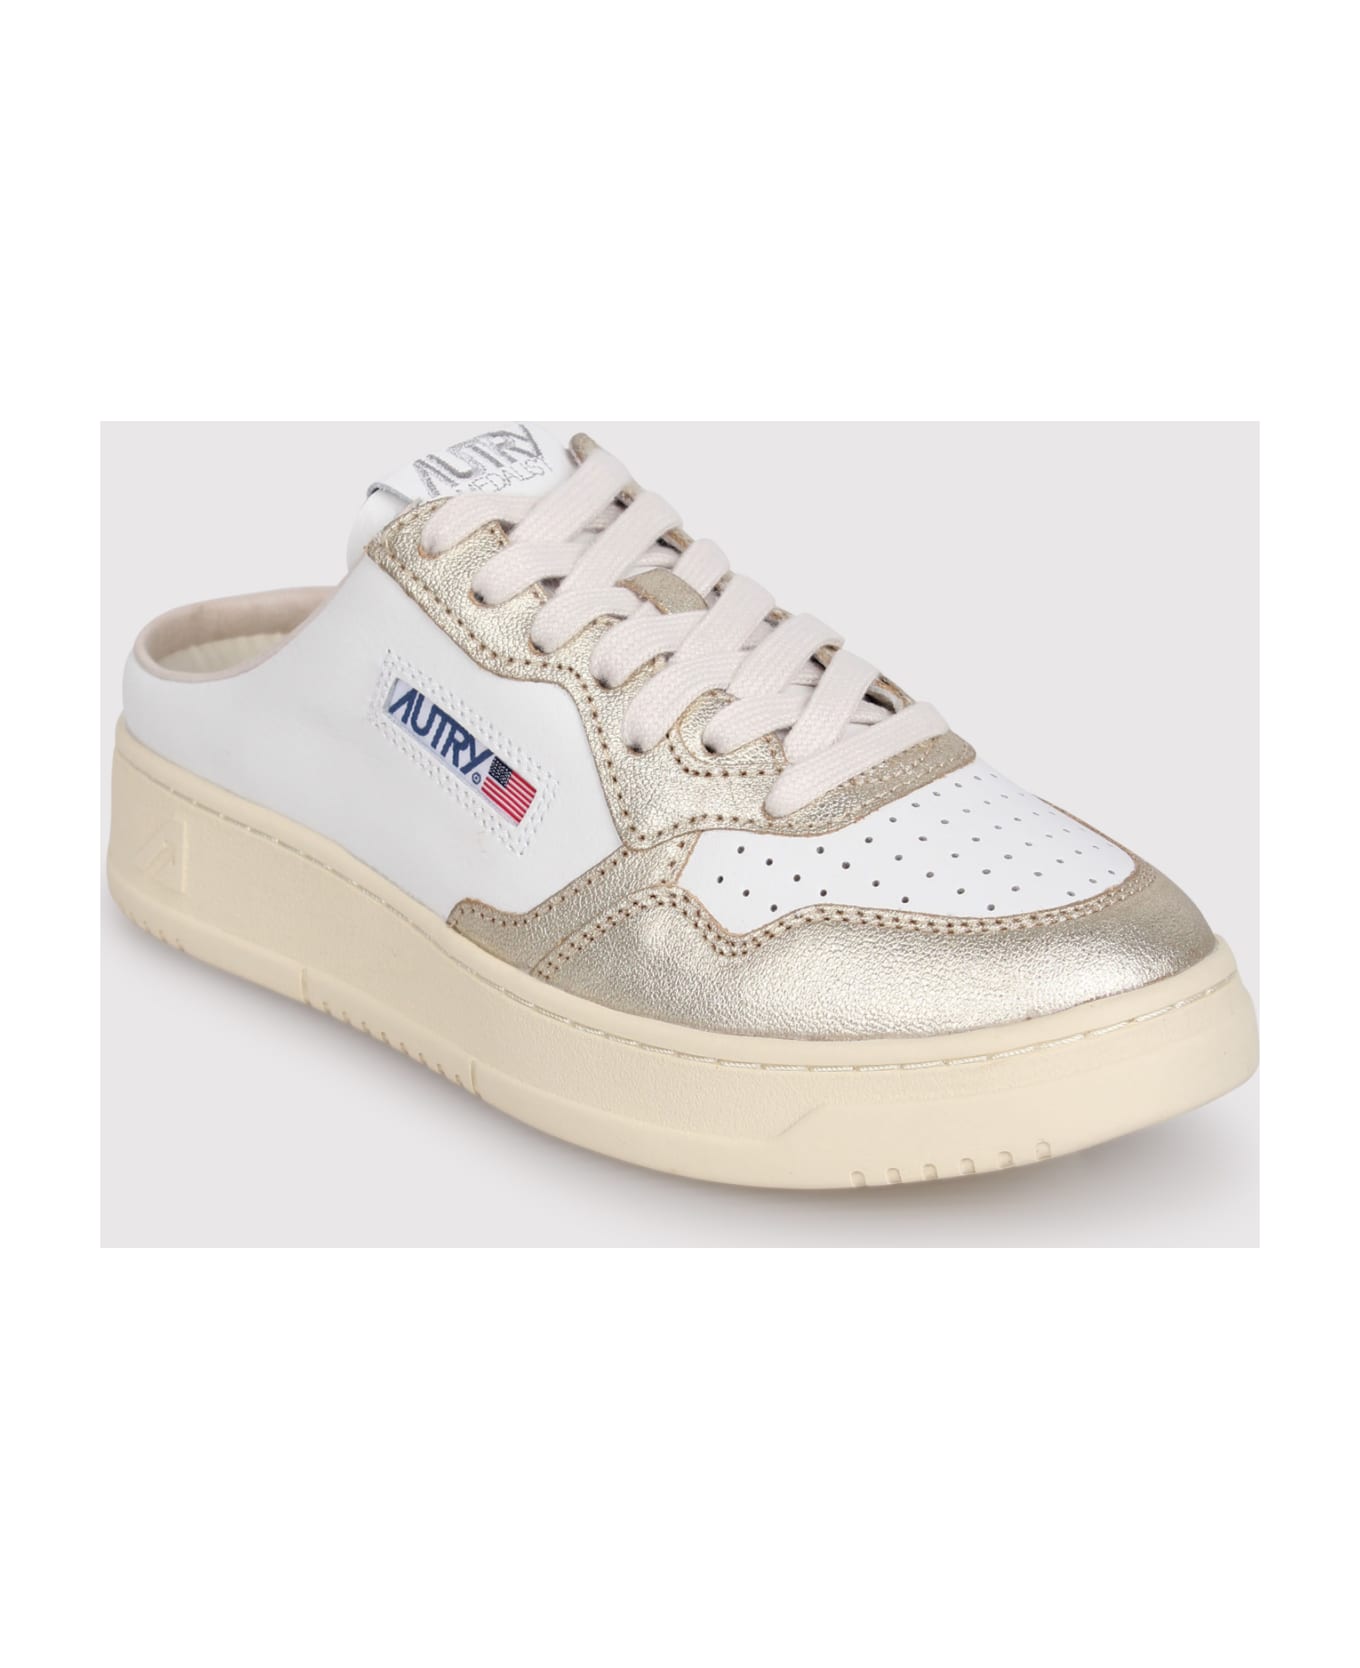 Autry Medalist Mule Low Sneakers In White Leather And Platinum